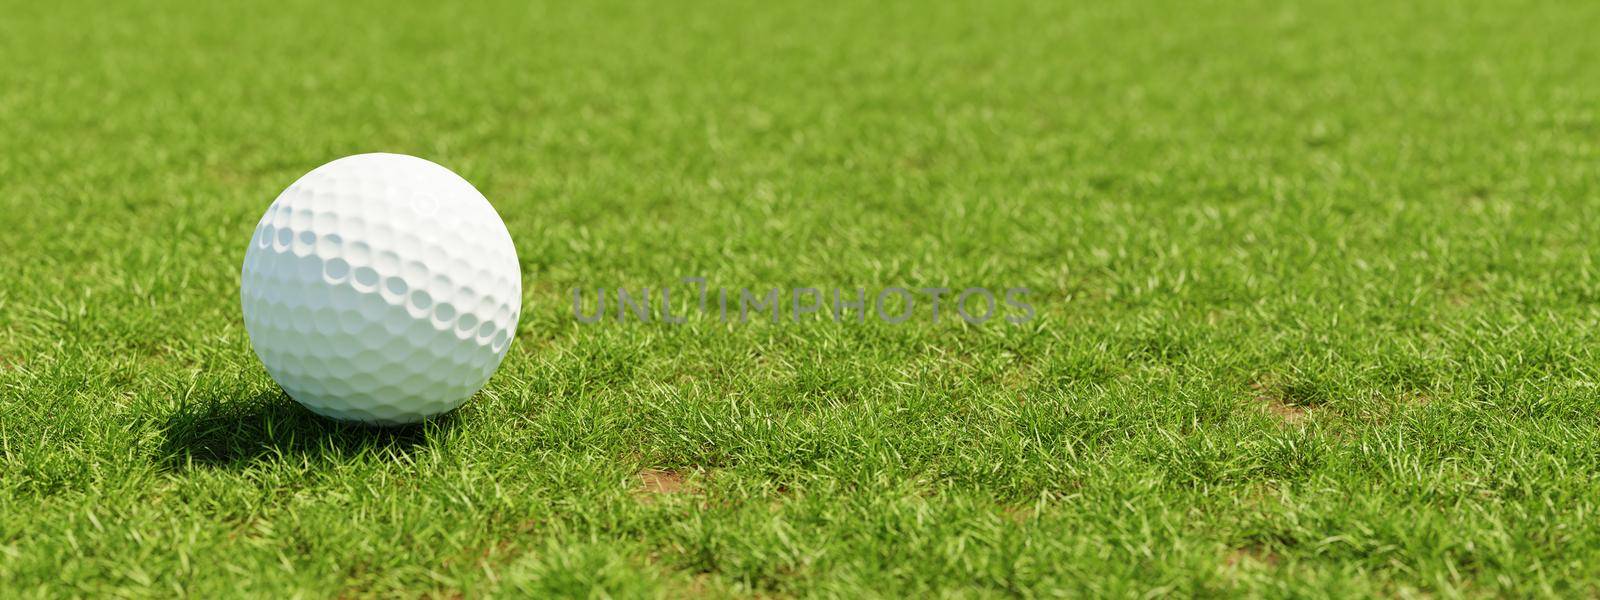 Golf ball on grass in fairway green background. Sport and athletic concept. 3D illustration rendering by MiniStocker